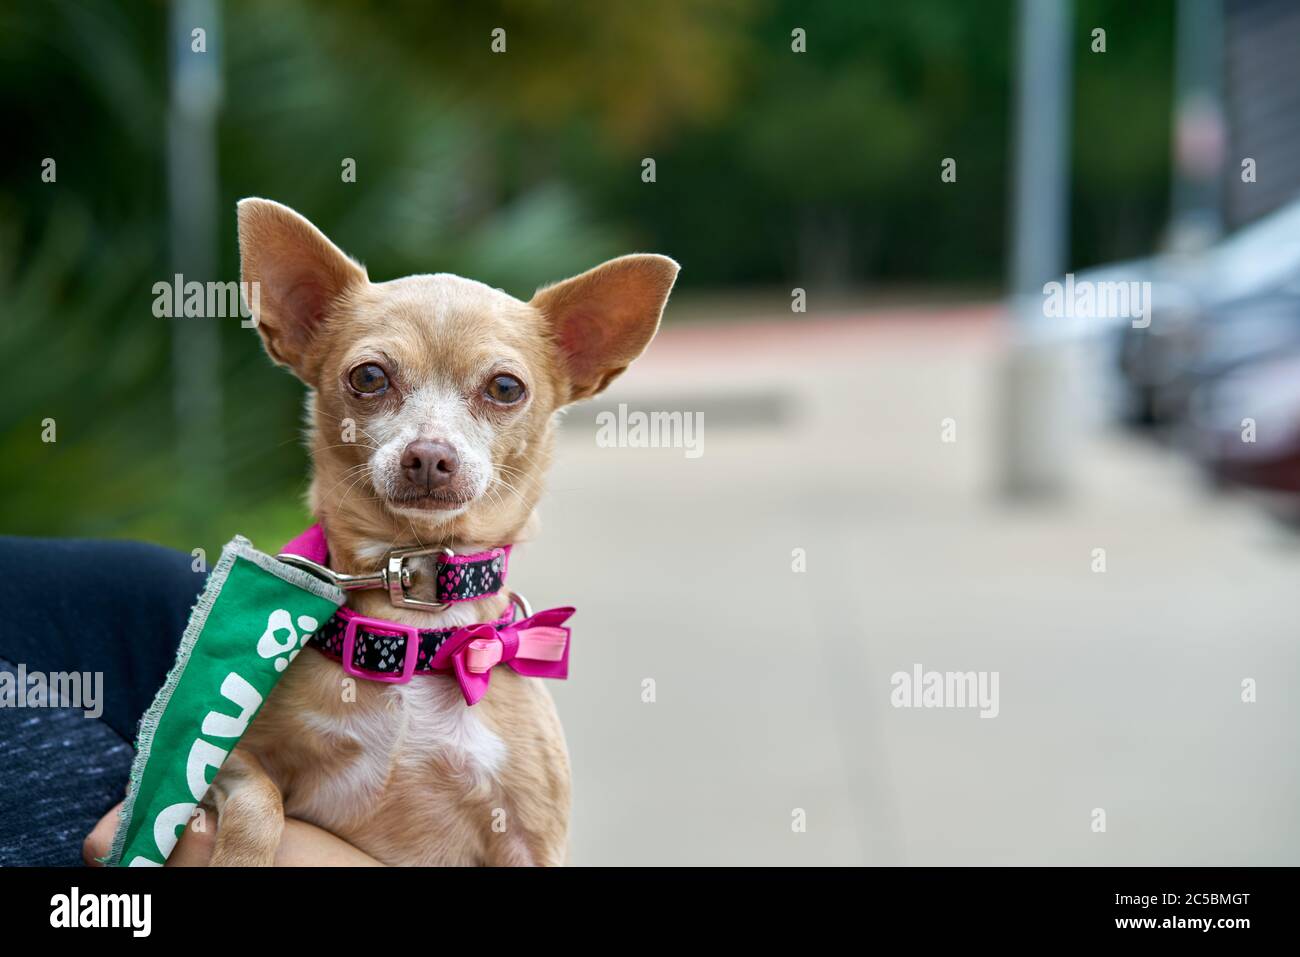 Dog held by owned with copy space Stock Photo